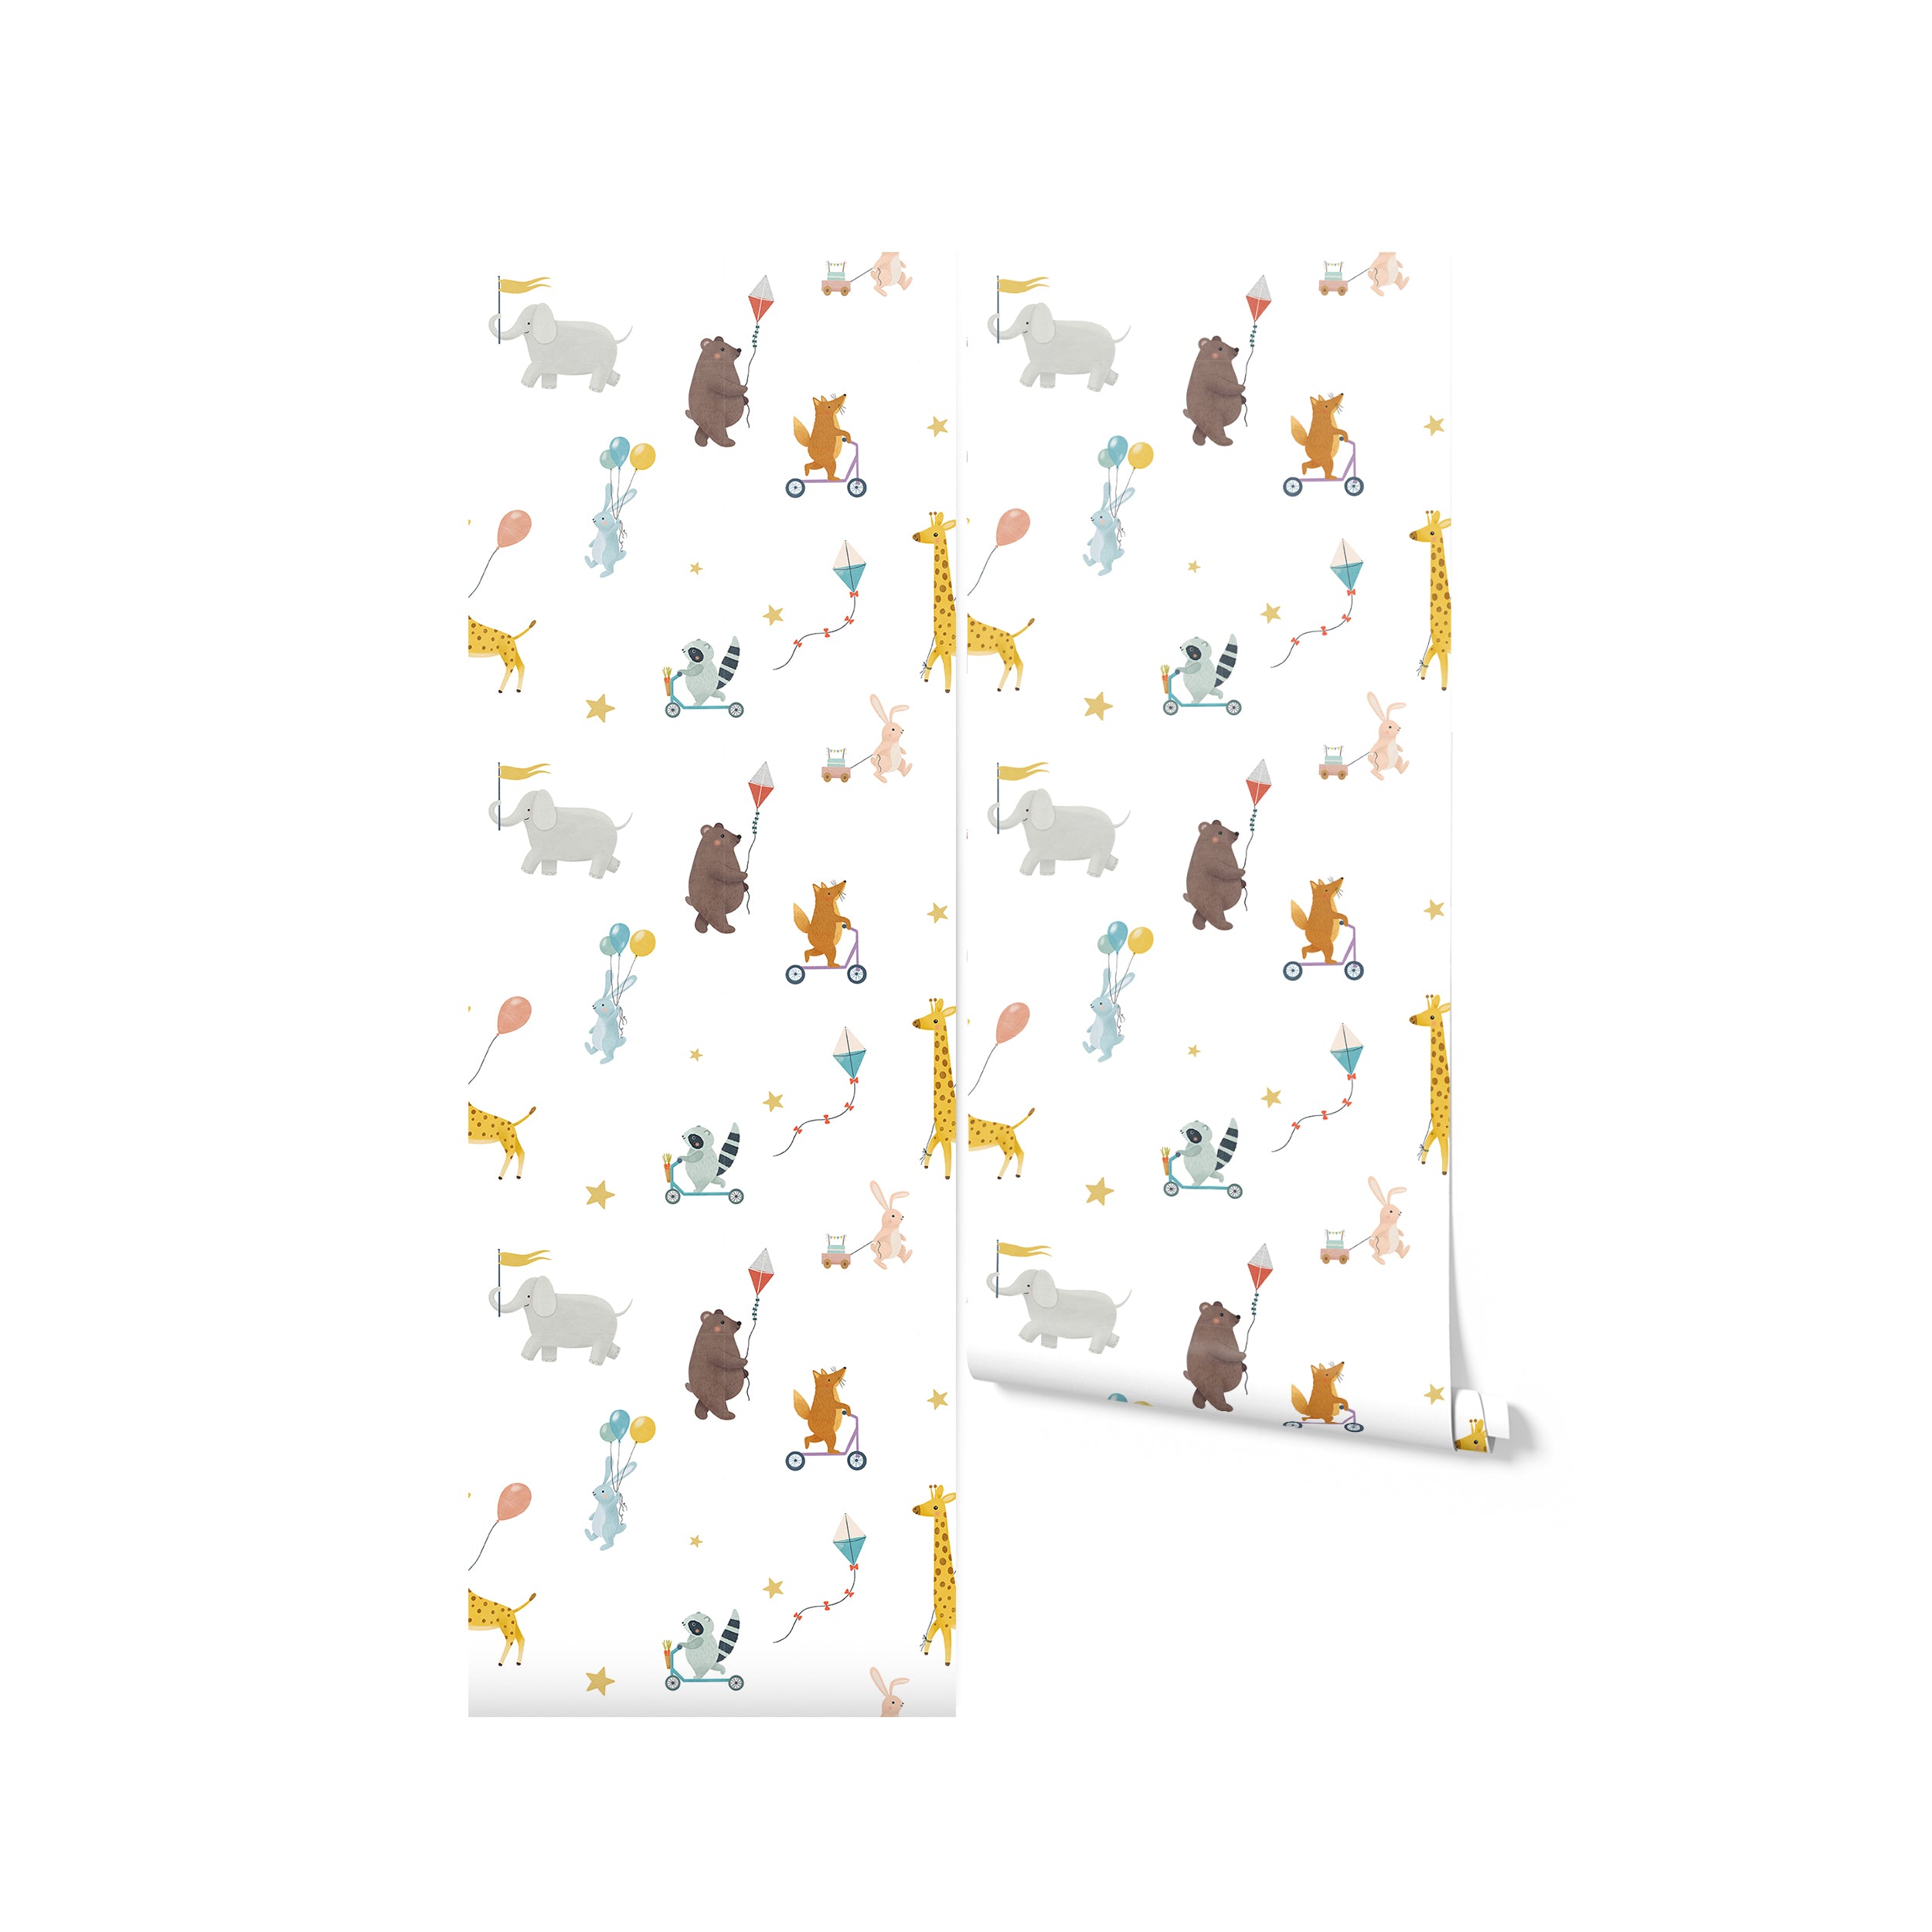 A roll of Adventure Wallpaper showing a detailed pattern of adventurous animals like giraffes, foxes, and elephants, all in playful scenarios, set against a white background with stars. This image highlights the wallpaper's vibrant and colorful design, perfect for a child's room or play area.